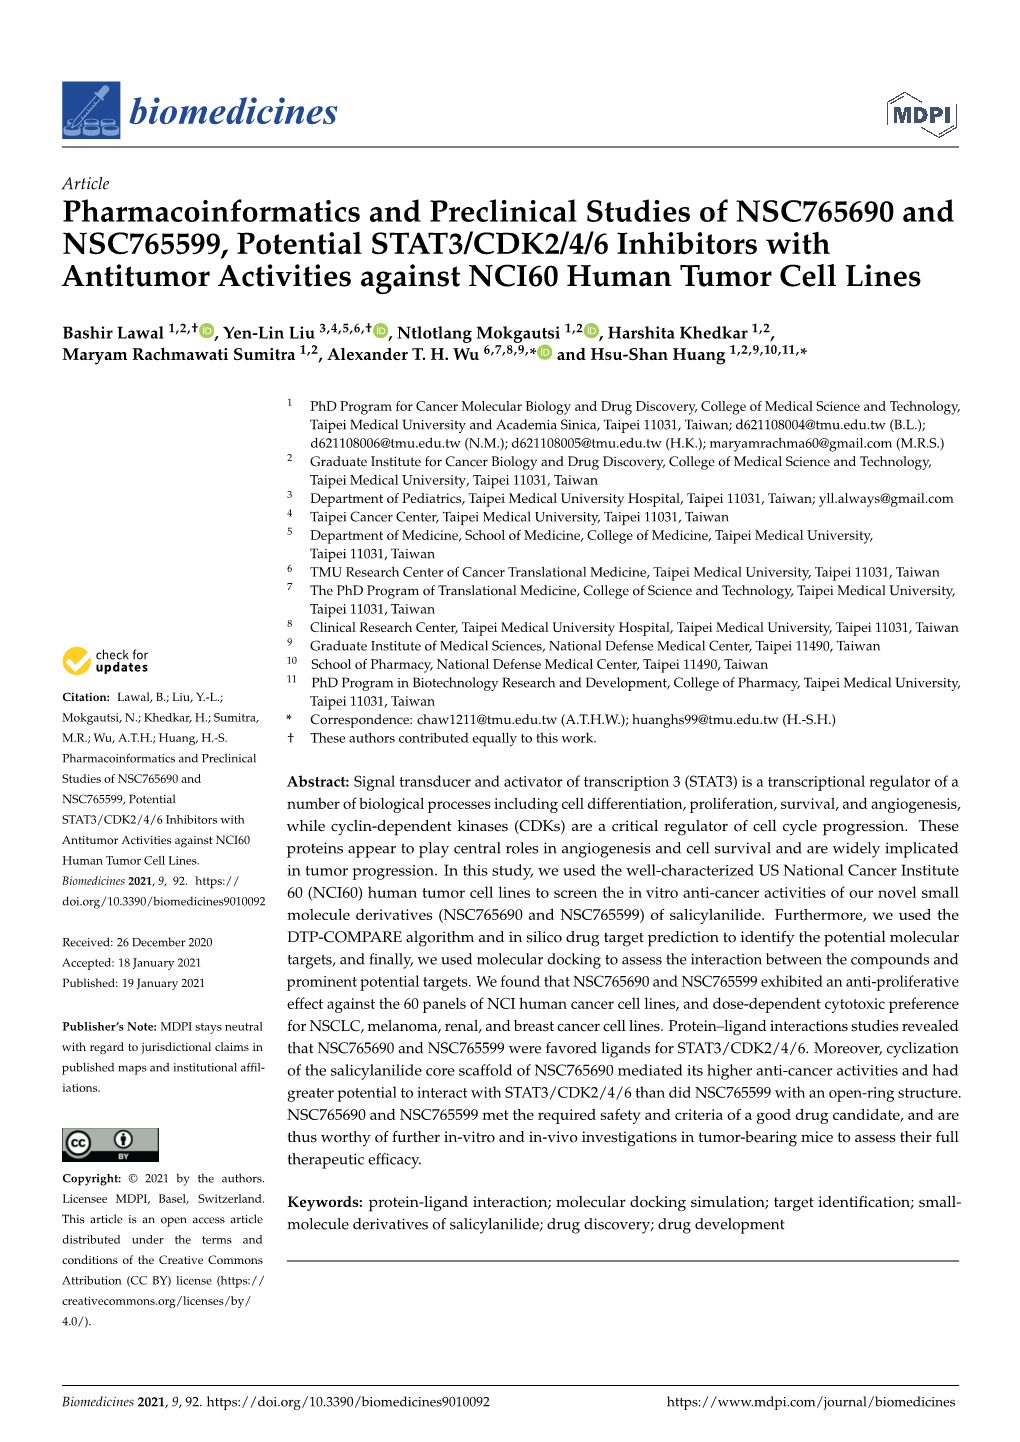 Pharmacoinformatics and Preclinical Studies of NSC765690 and NSC765599, Potential STAT3/CDK2/4/6 Inhibitors with Antitumor Activ